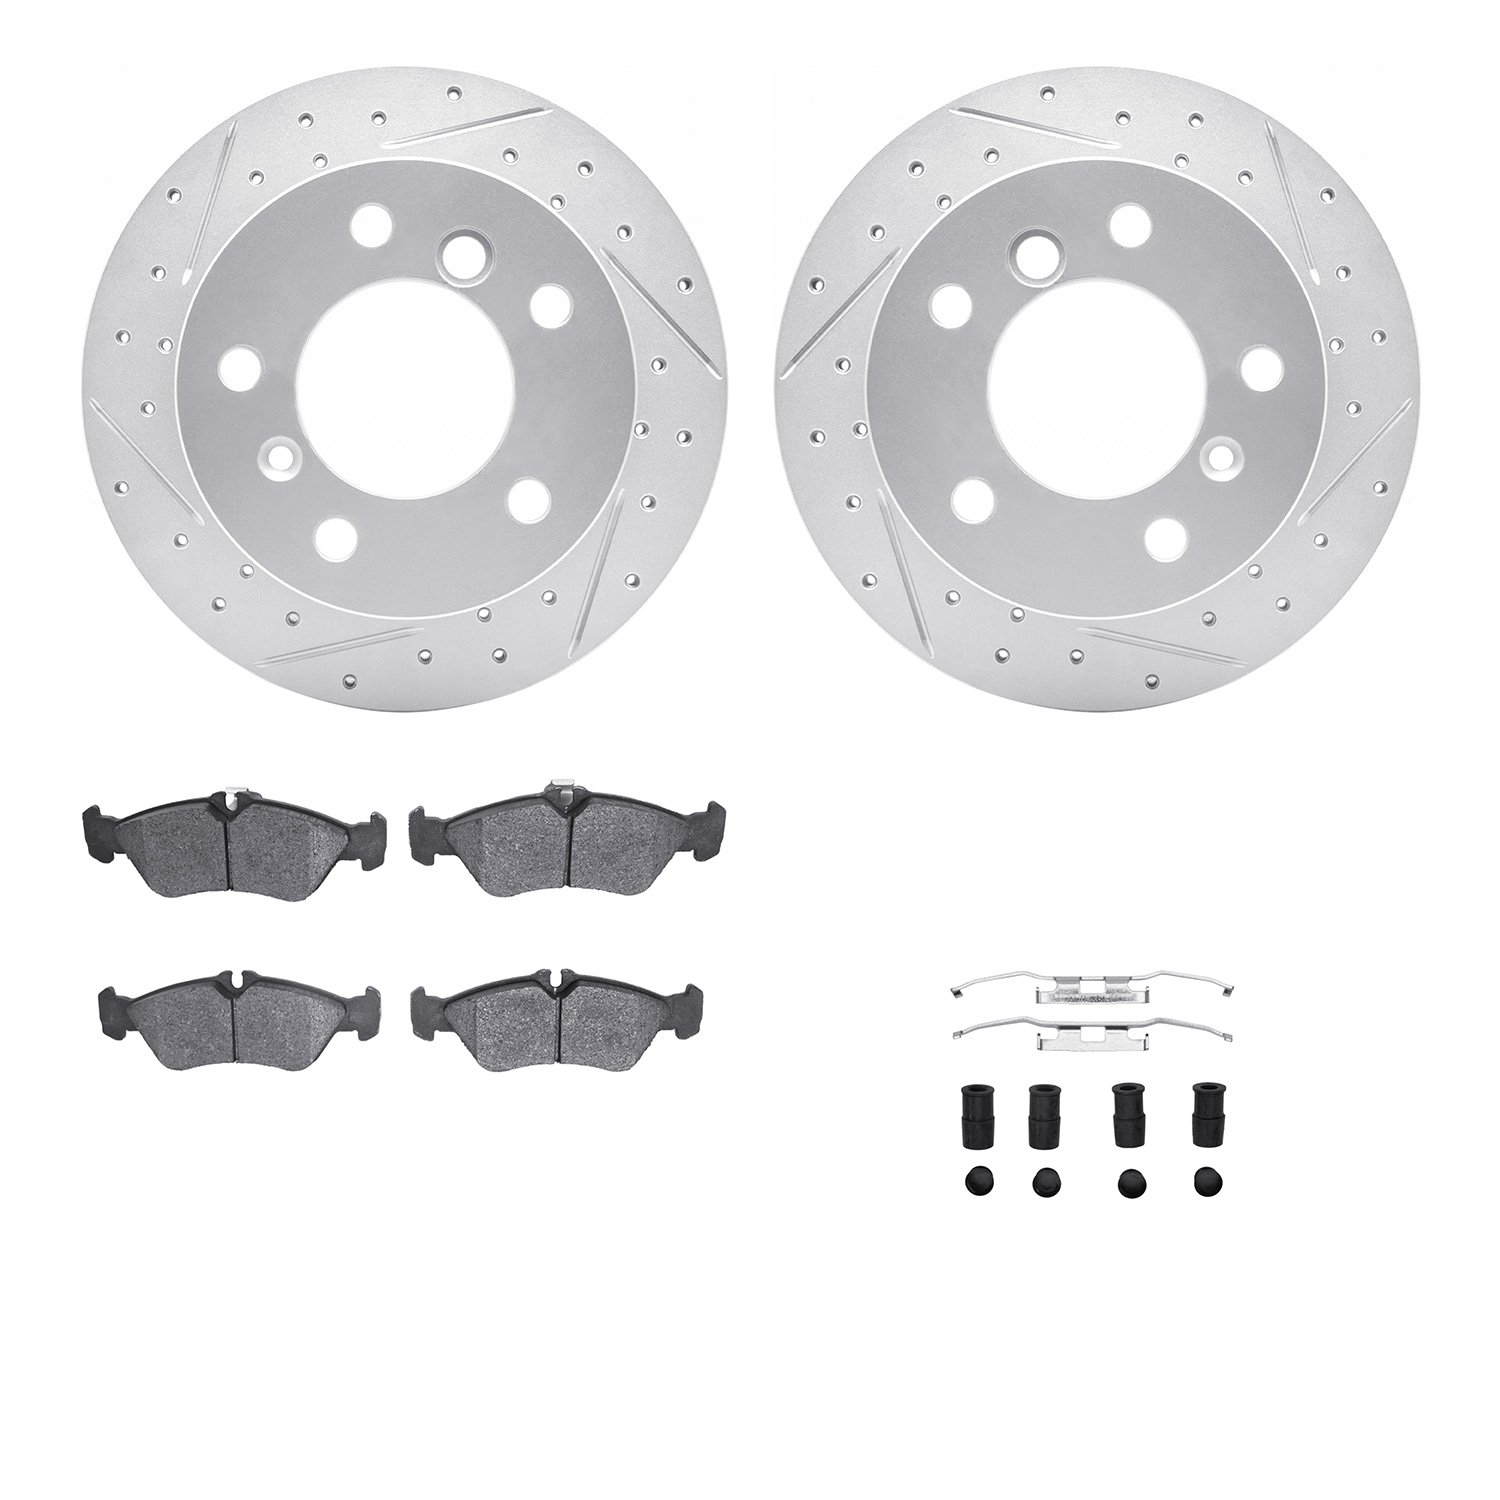 2212-40019 Geoperformance Drilled/Slotted Rotors w/Heavy-Duty Pads Kit & Hardware, 2002-2006 Multiple Makes/Models, Position: Re